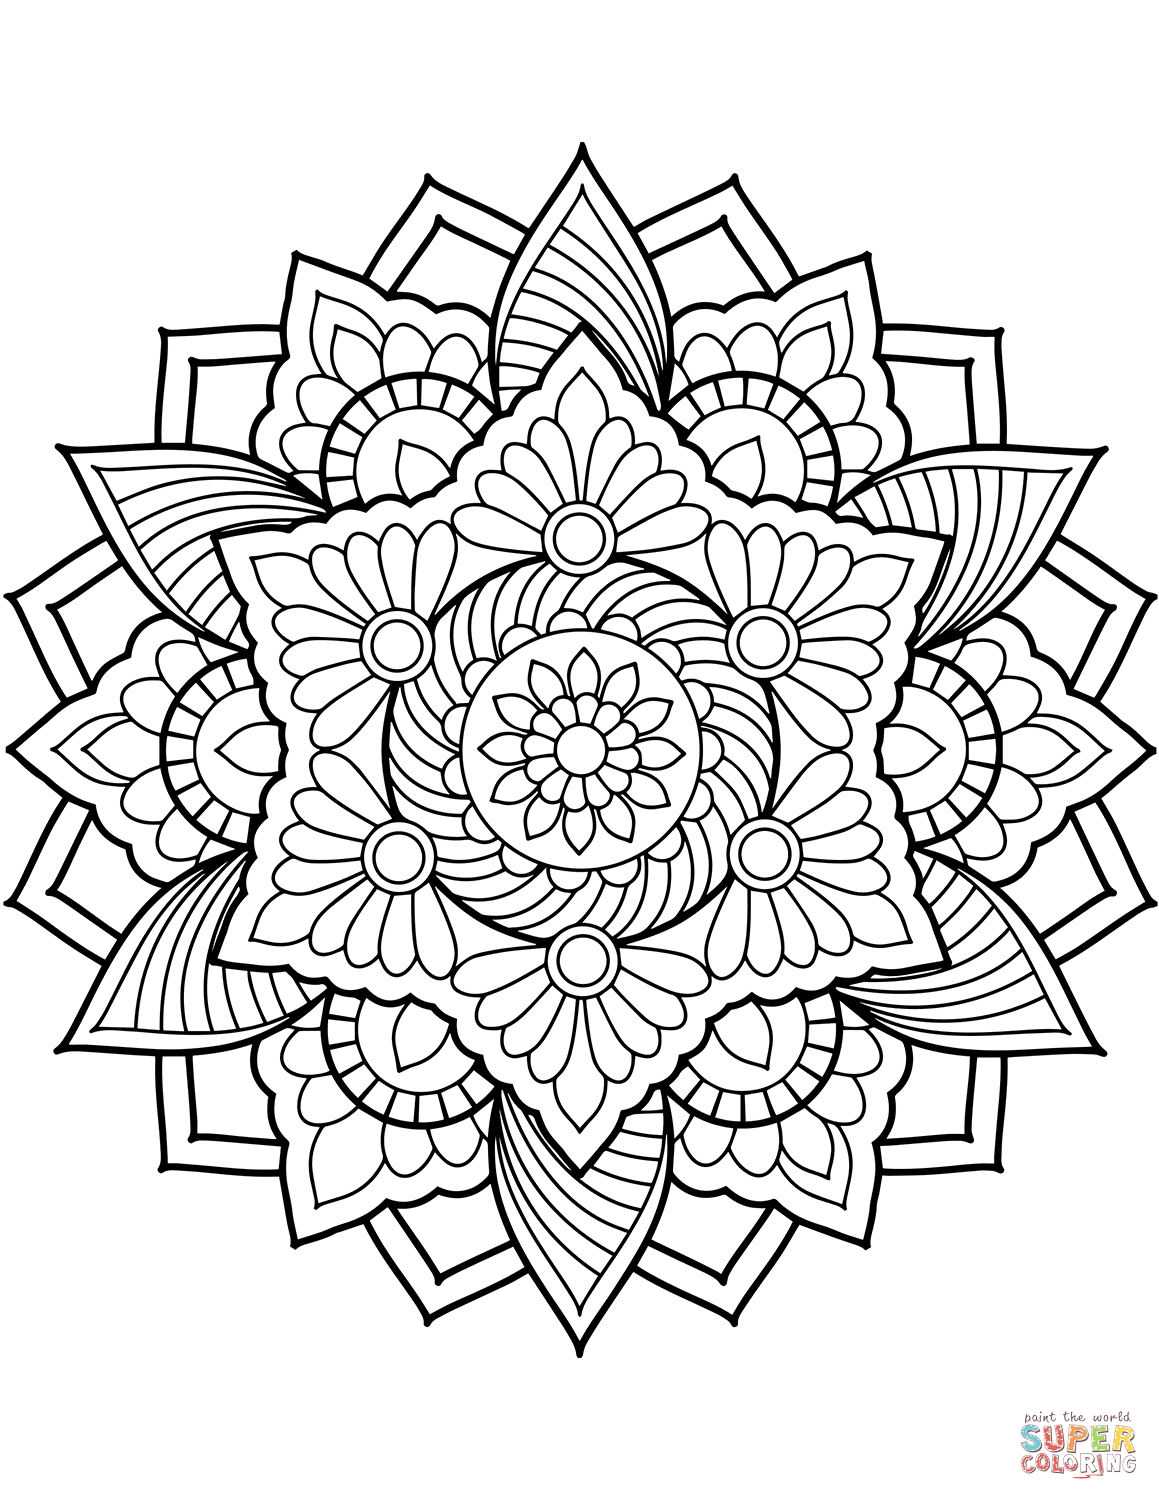 Flower Mandala Coloring Page From Floral Mandalas Category. Select ...